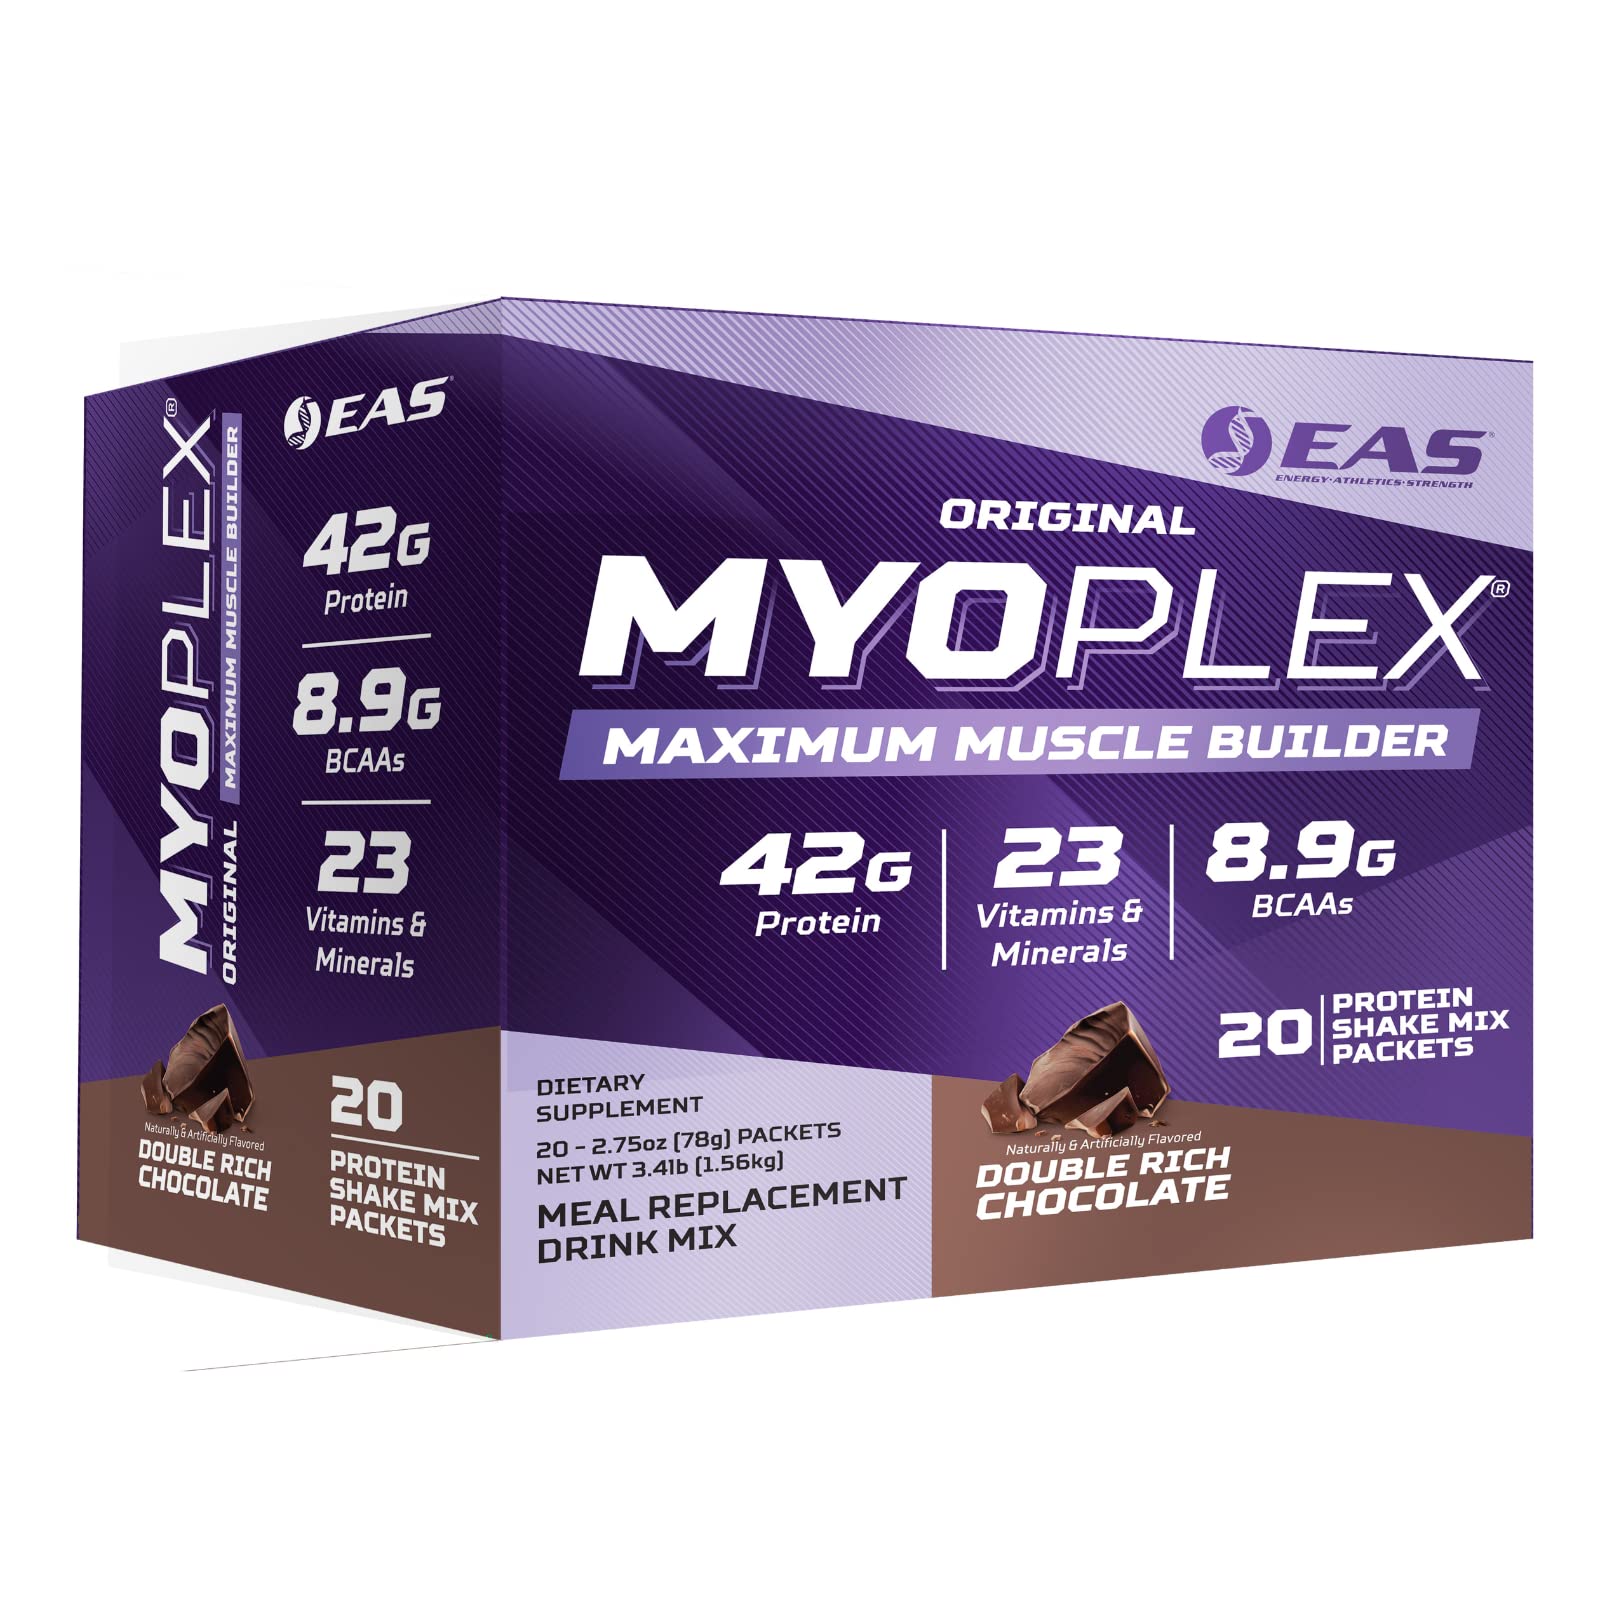 EAS Original MYOPLEX Maximum Muscle Builder - Meal Replacement Protein Blend Drink Mix - Double Rich Chocolate - 20 Individual Packets - 42g Per Serving